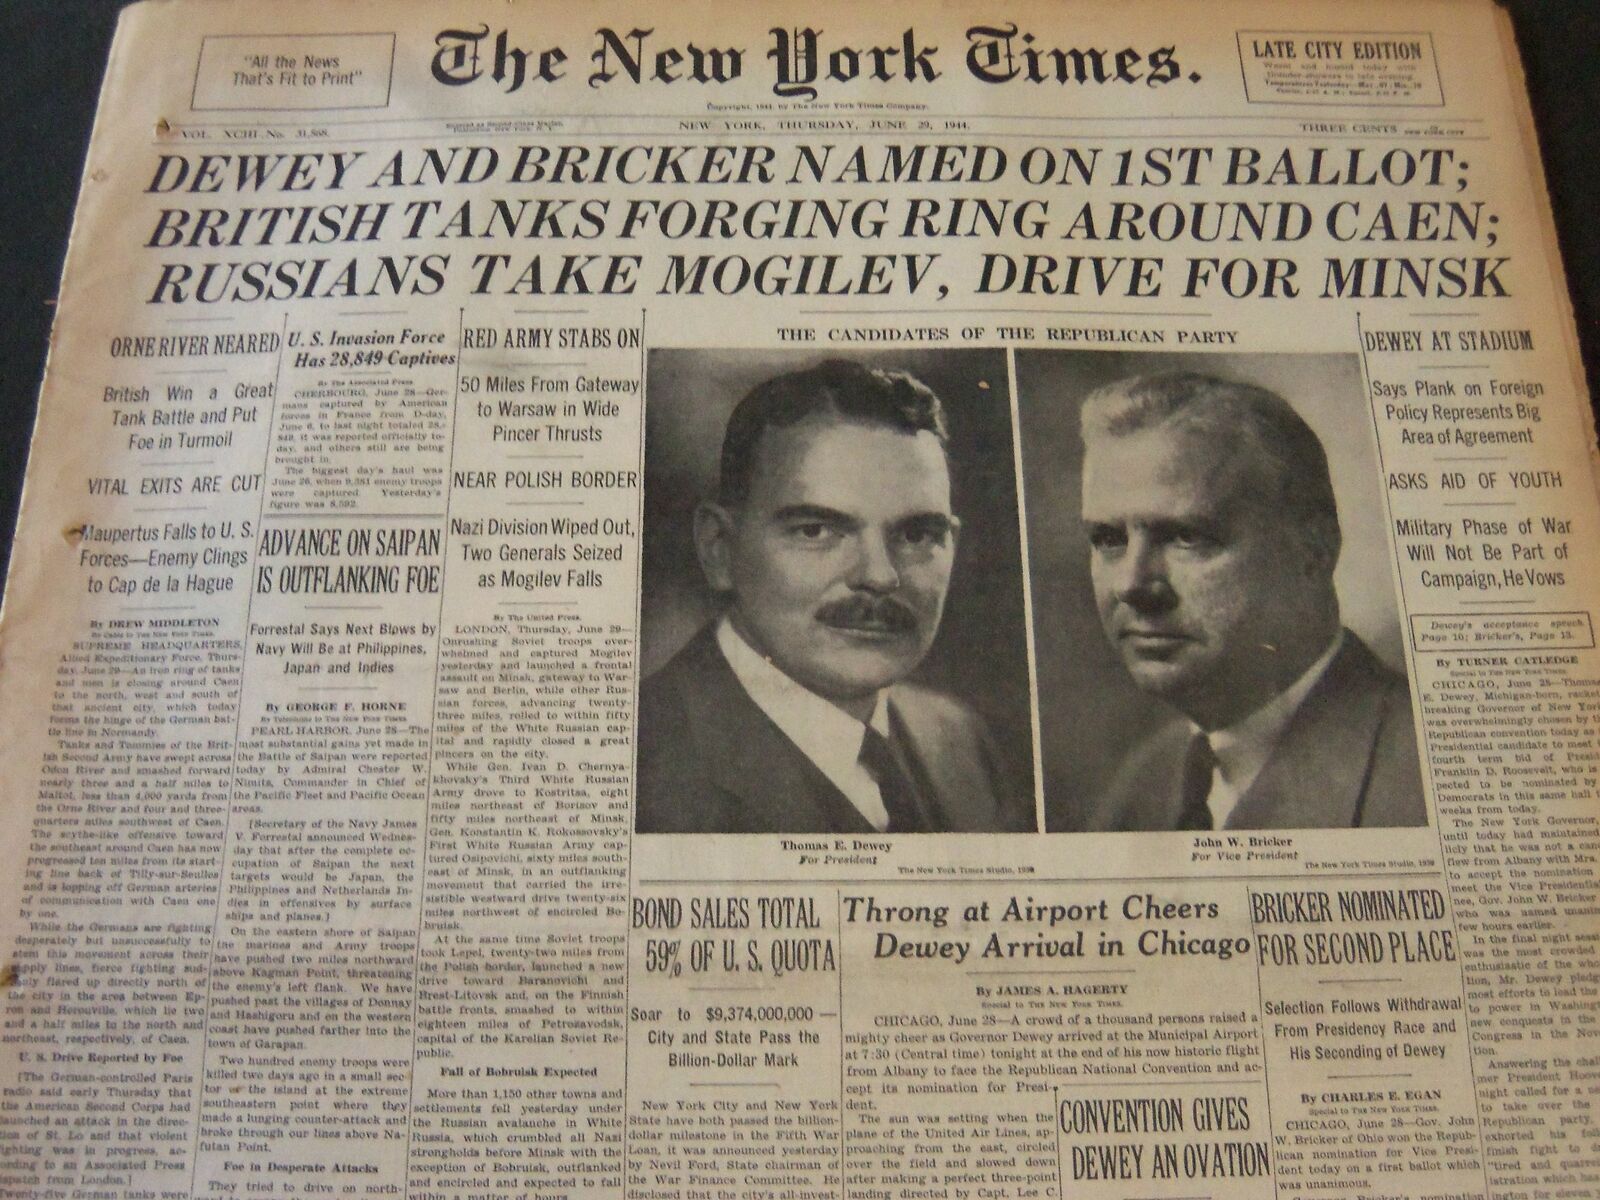 1944 JUNE 29 NEW YORK TIMES - DEWEY AND BRICKER NAMED ON 1ST BALLOT - NT 5903